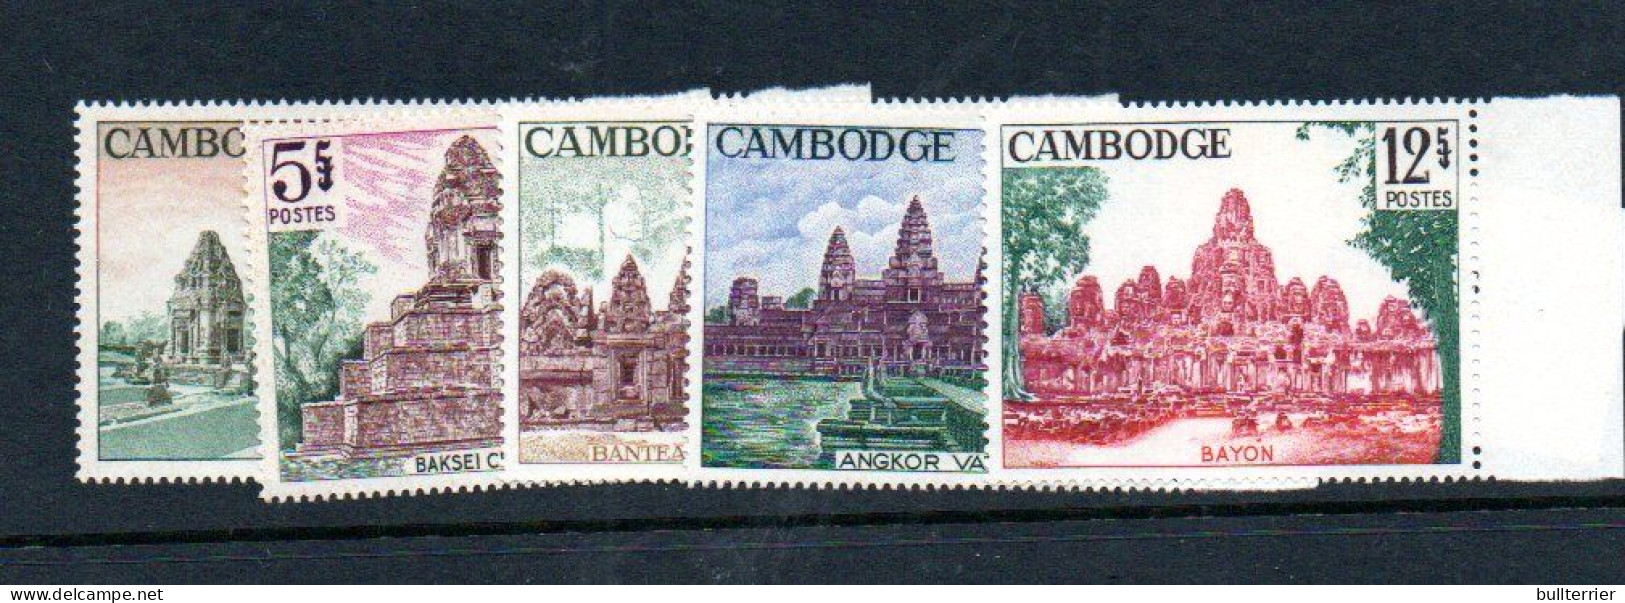 CAMBODIA - 1966 - TEMPLES SET OF 6  MINT NEVER HINGED - Cambodja